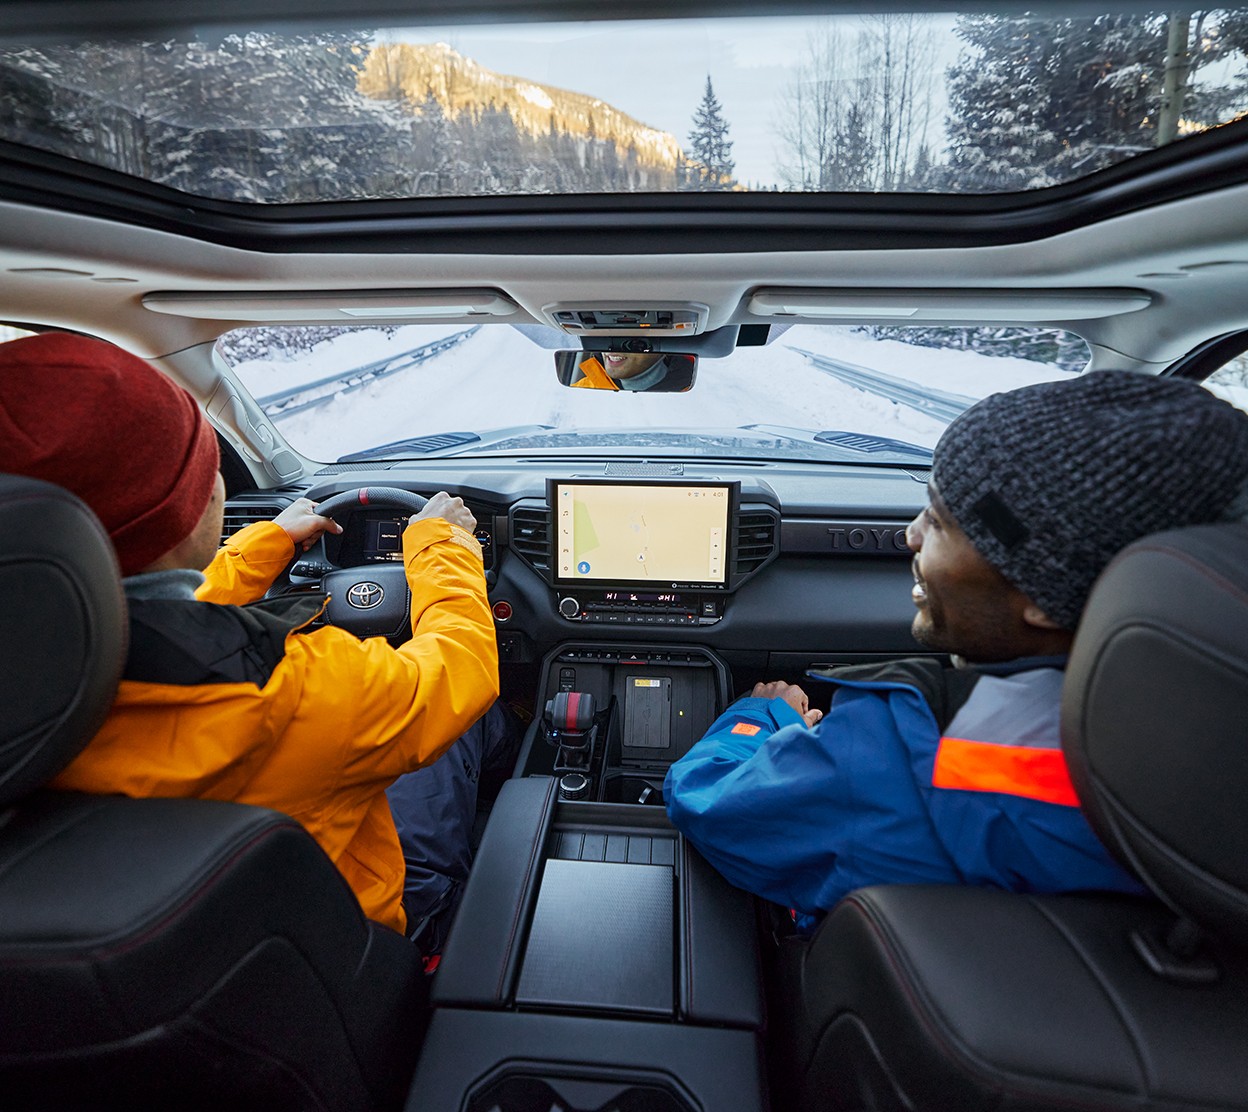 Inside a Toyota vehicle, a couple wearing bright clothing drives down a snowy road. The man smiles towards the driver and through the windshield and moonroof we see a snowy forest.